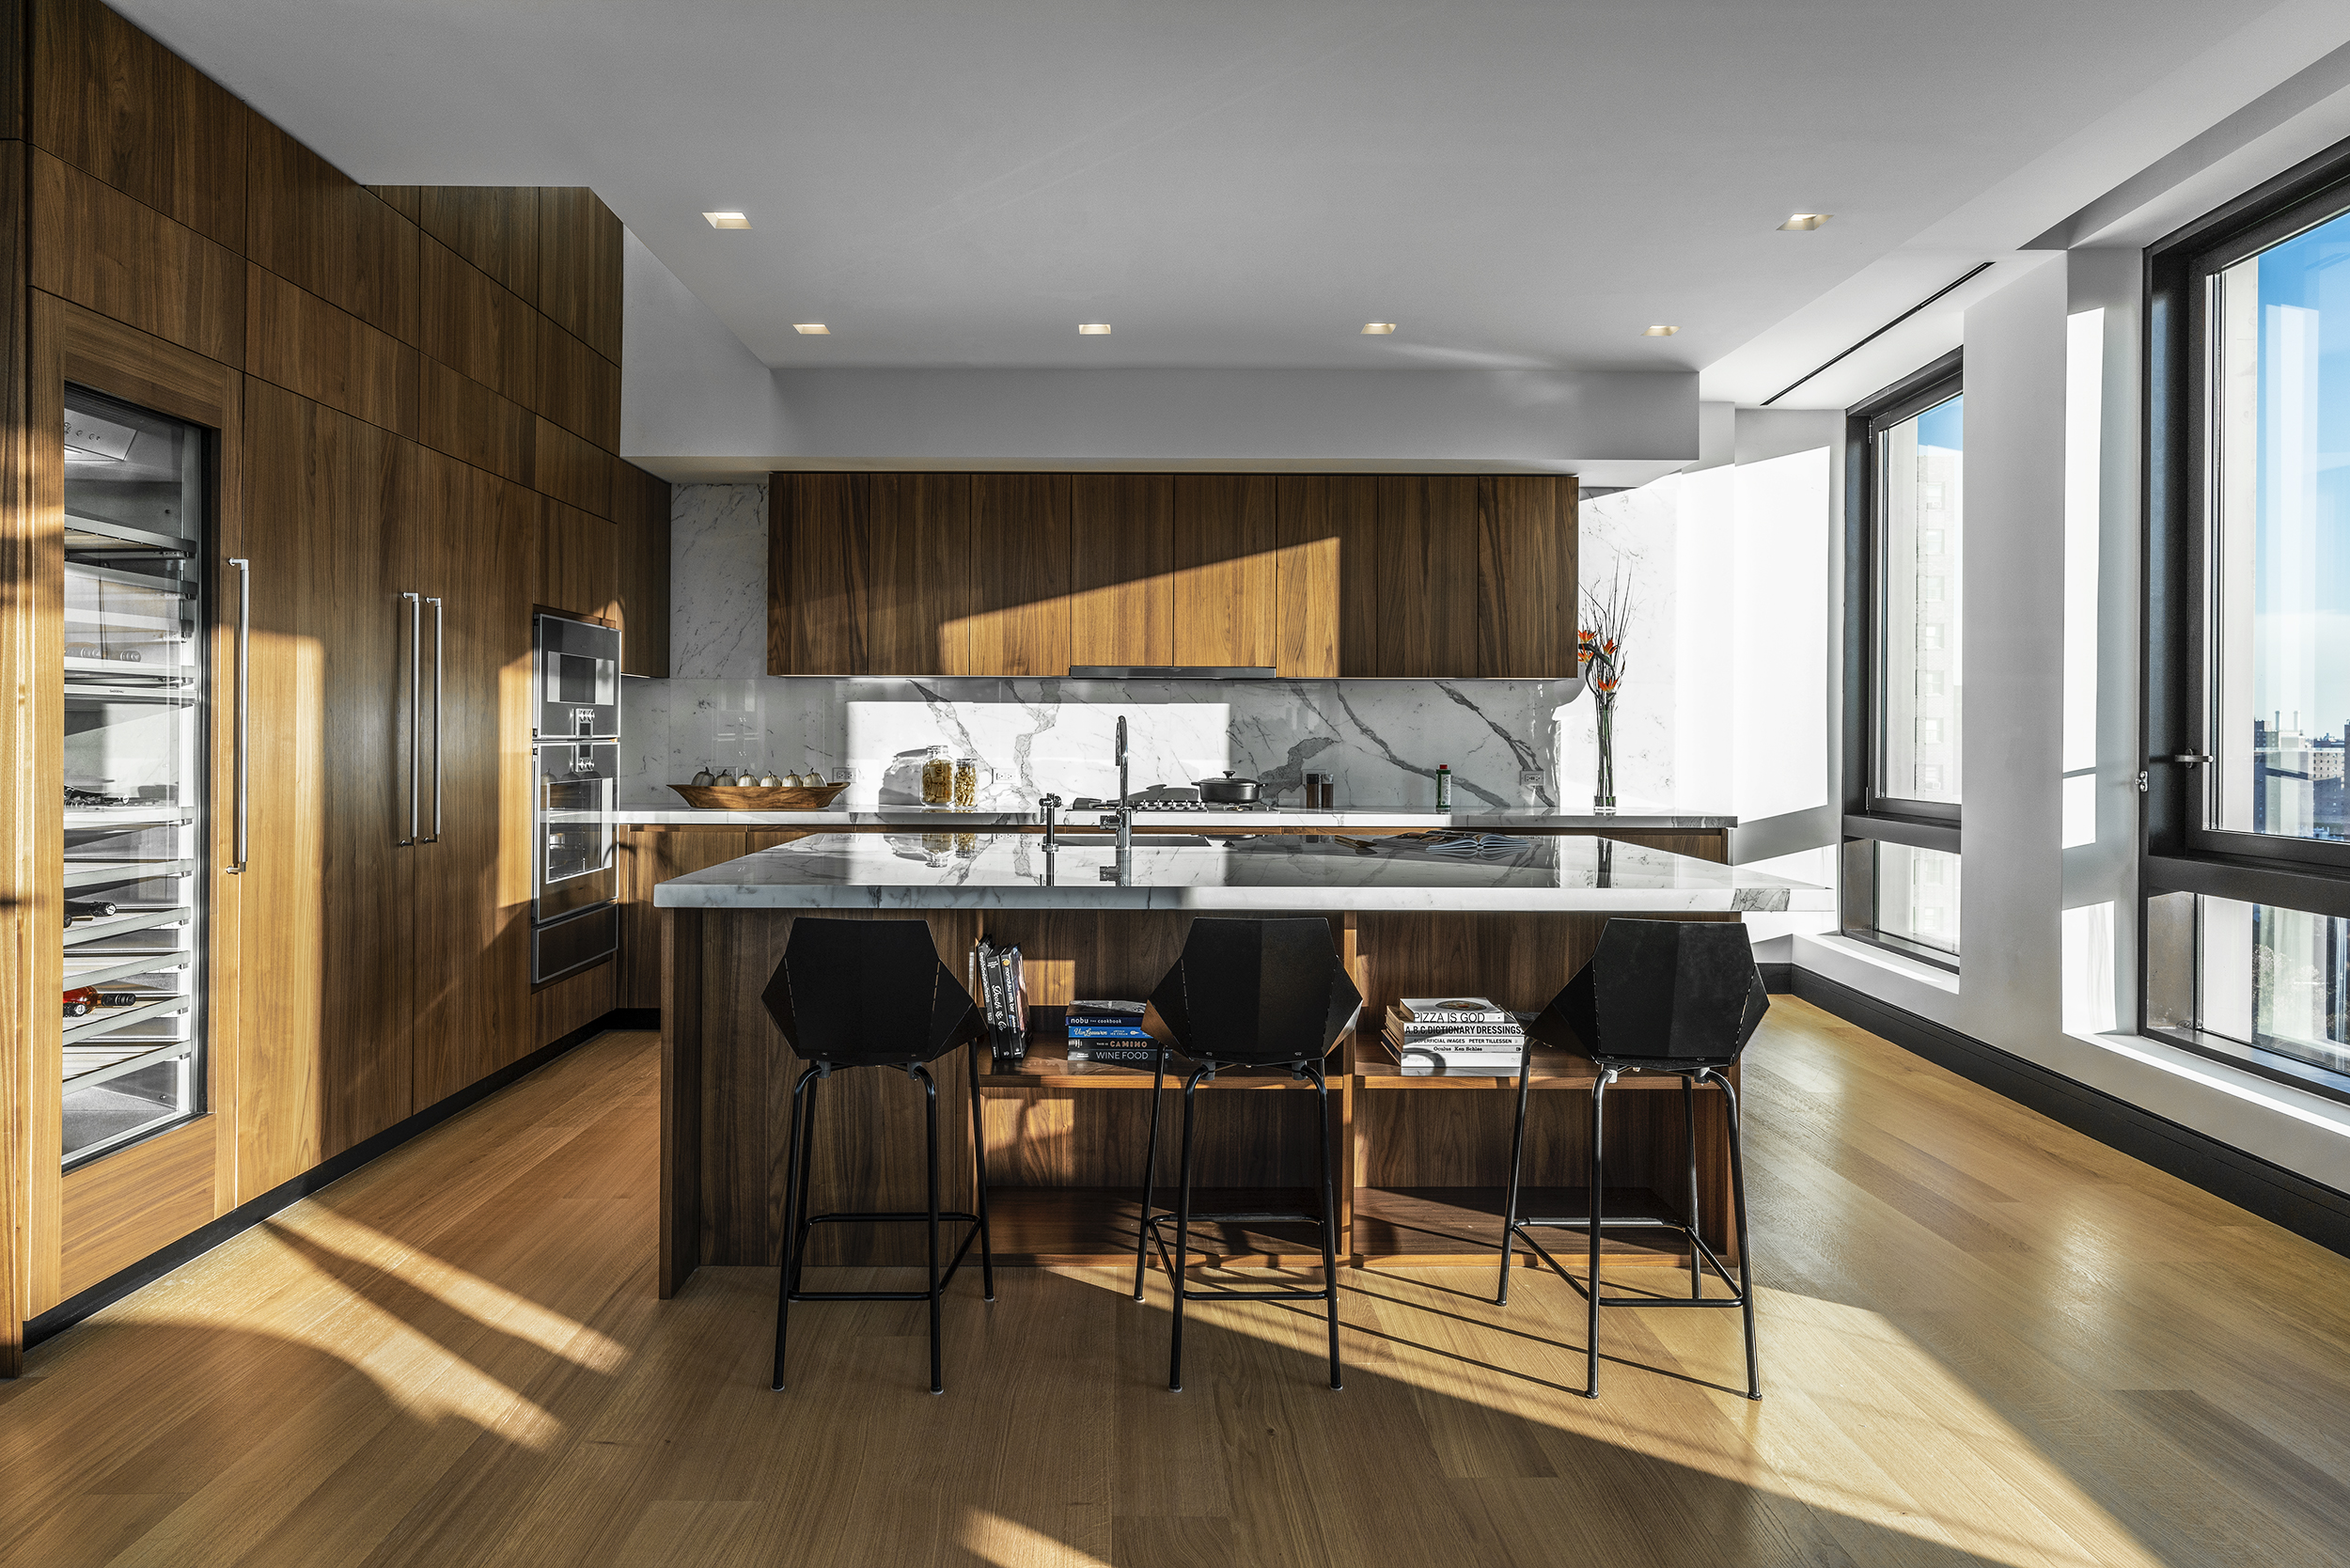 Luxury Manhattan meets downtown edge: Top 10 condos on the Lower East Side